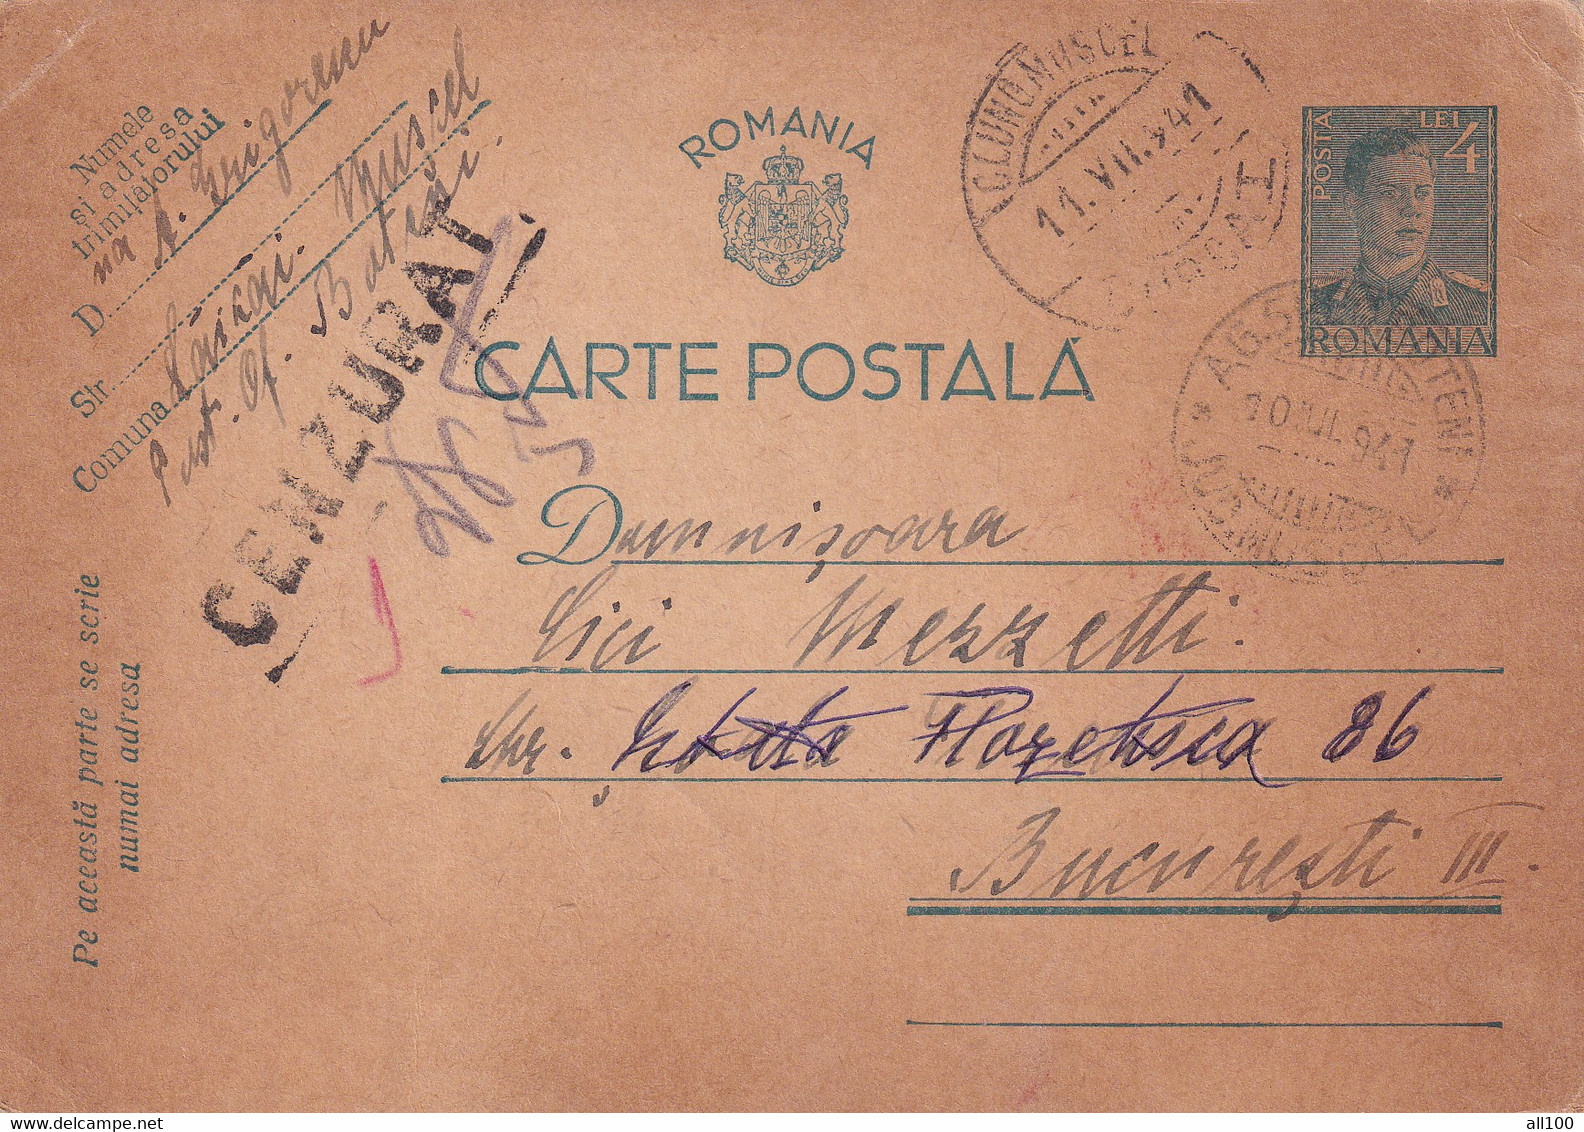 A16460 - MILITARY LETTER  POSTAL STATIONERY CENZORED CAMPULUNG MUSCEL  KING MICHAEL 4 LEI 1941 - Storia Postale Seconda Guerra Mondiale